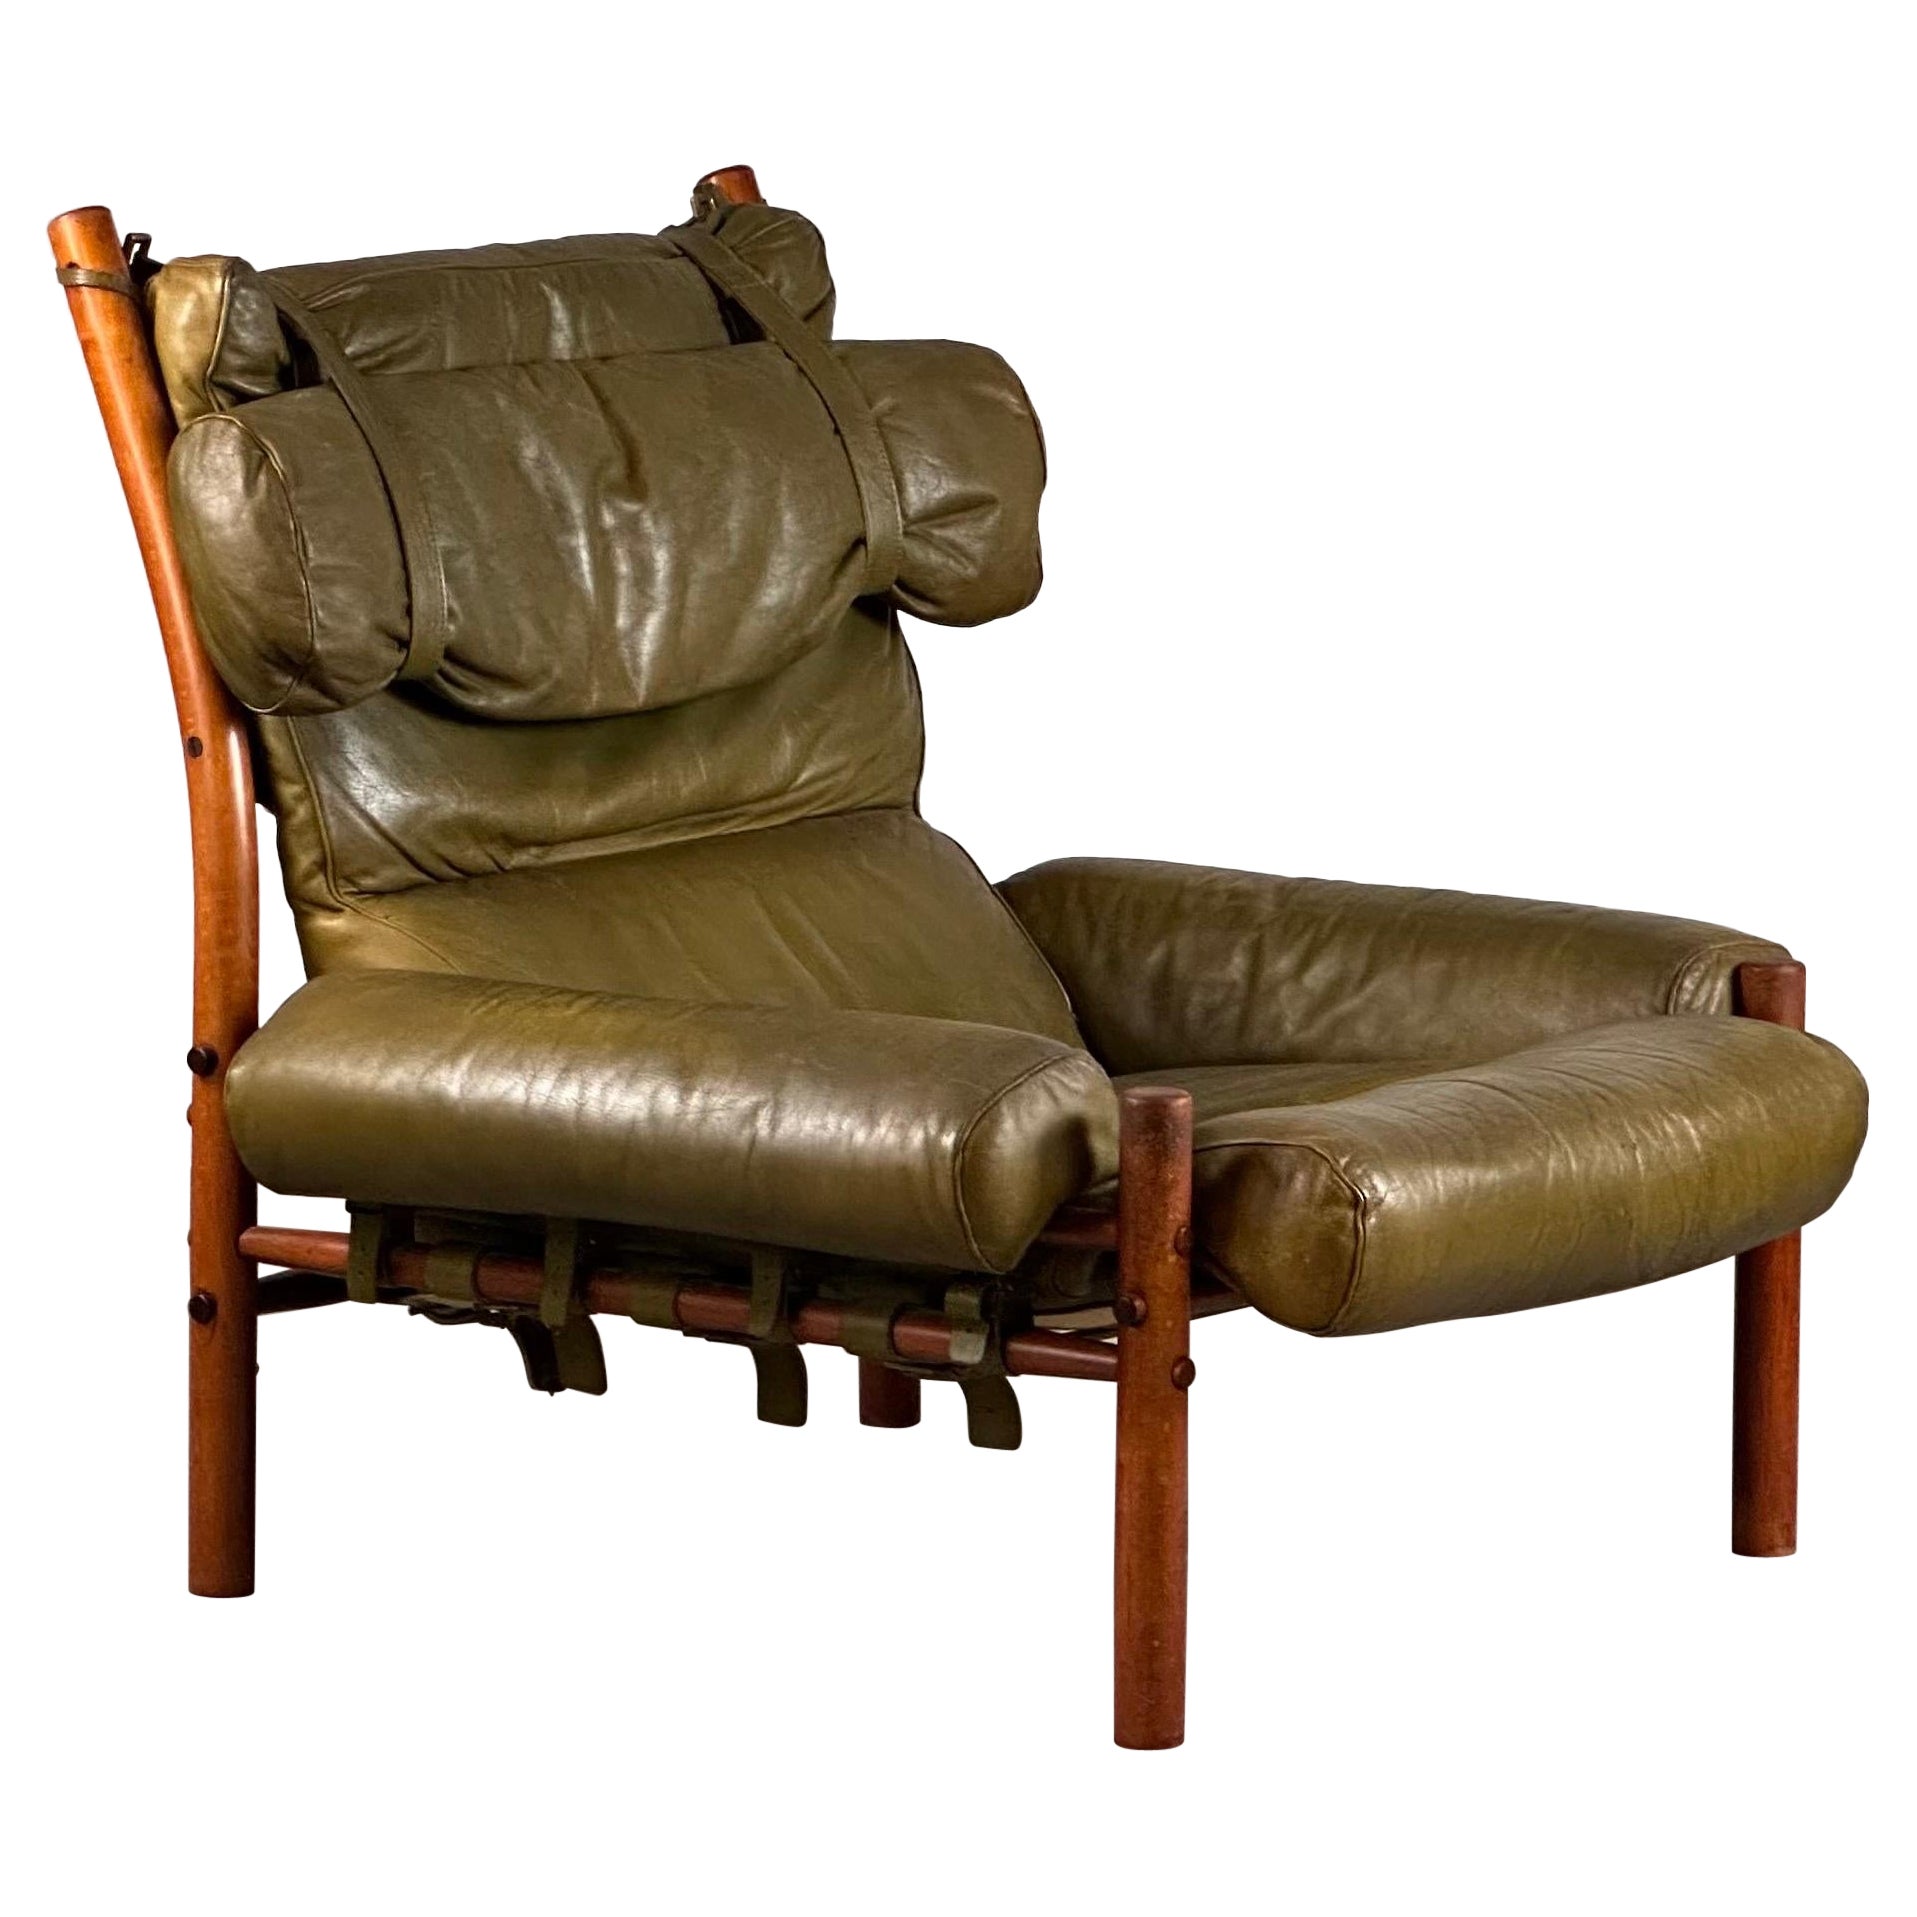 "Inca" Armchair by Arne Norell in Patinated Green Buffalo Leather, 1970s Sweden